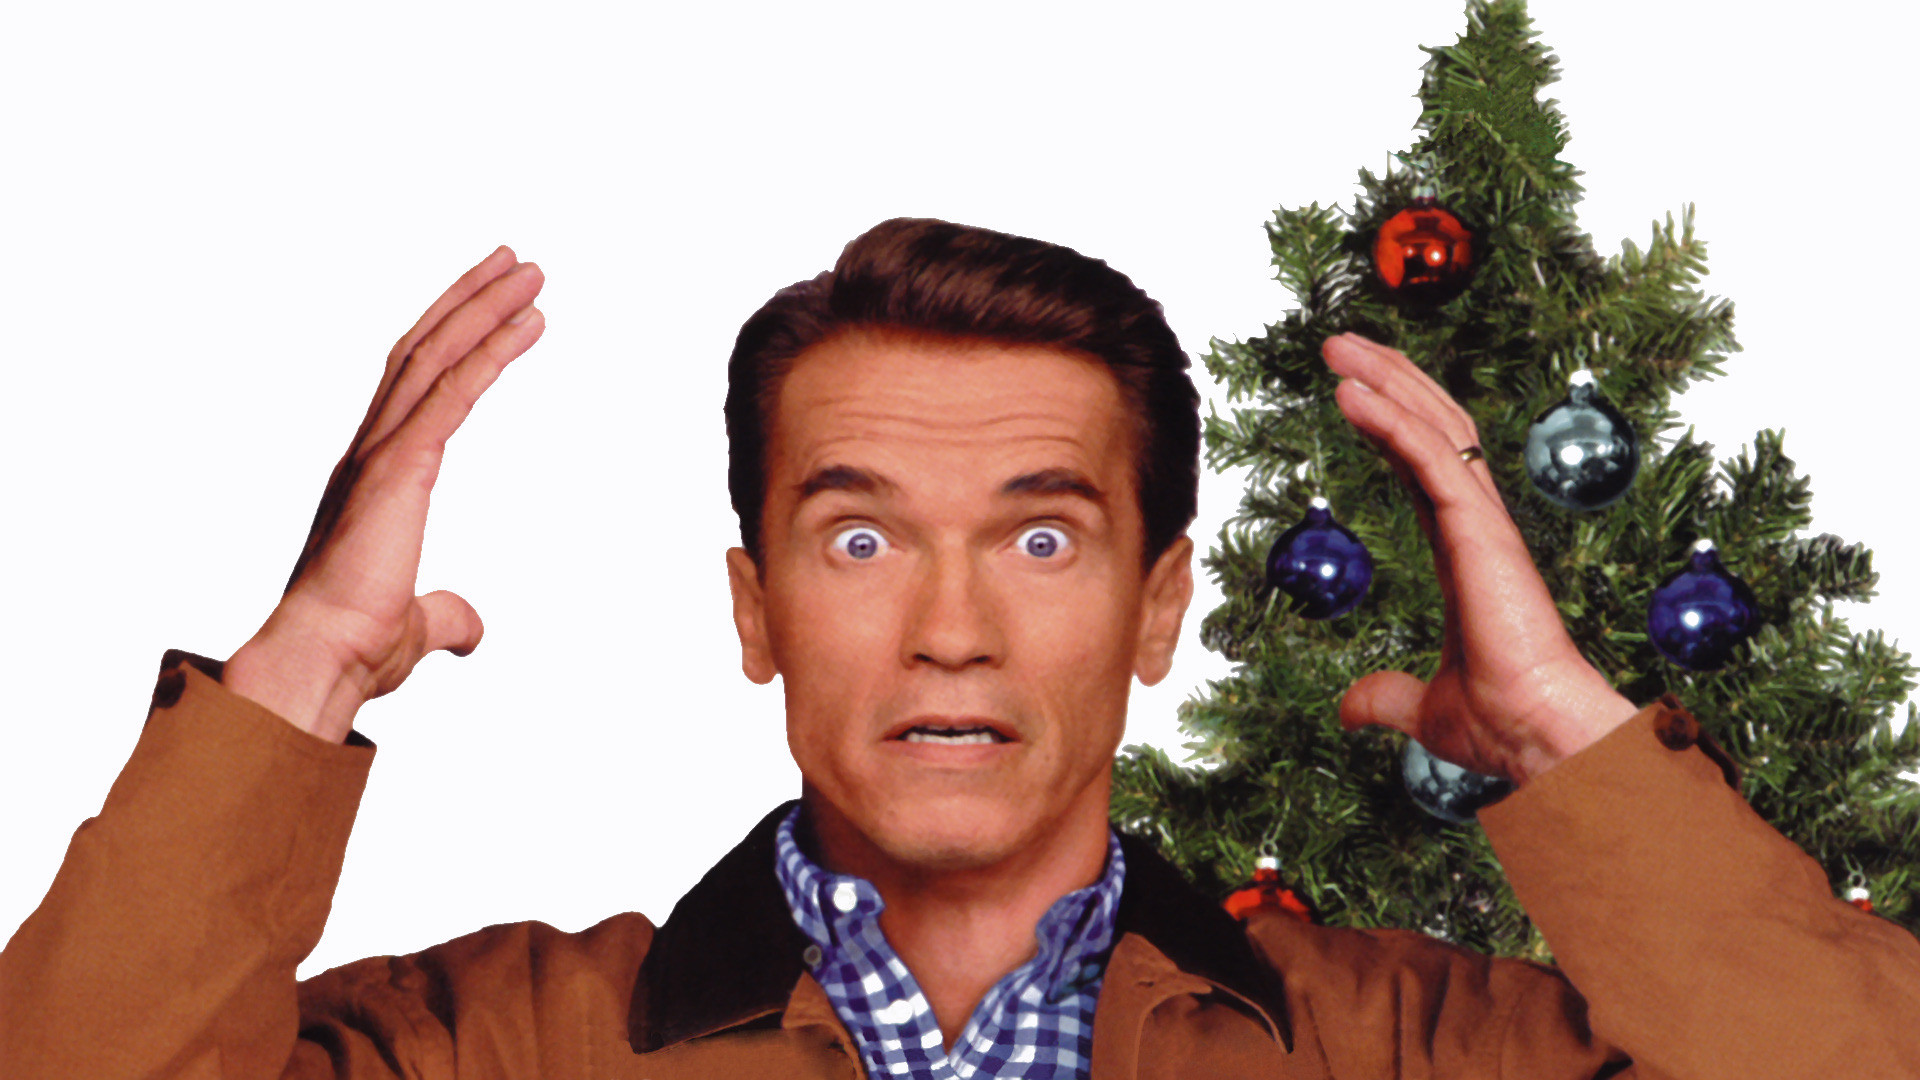 Image of Arnold Schwarzenegger from the movie Jingle All the Way